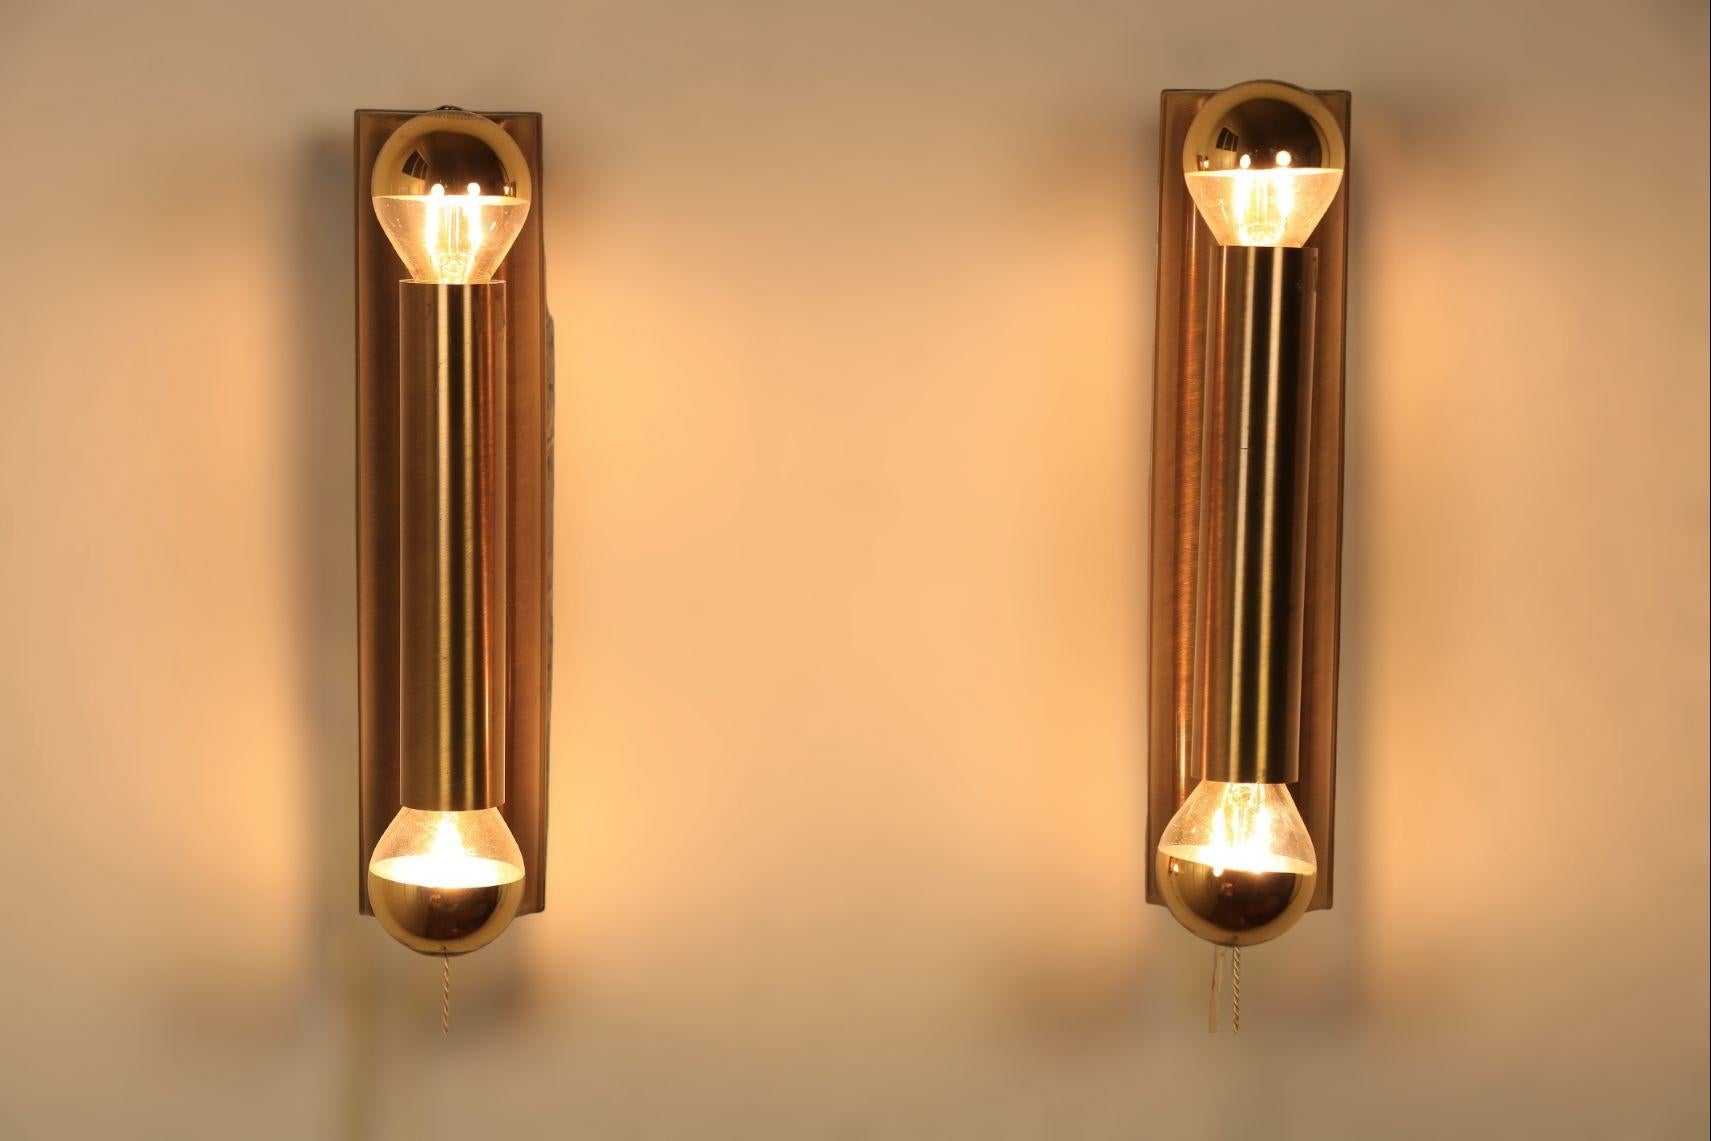 Set of two wall lamps from the late 1970s.

Minimalist design.
Brass. 
Very effective with golden head mirror bulbs (included for Europe).

Measures: Height: 24 cm / 9.45 inch.